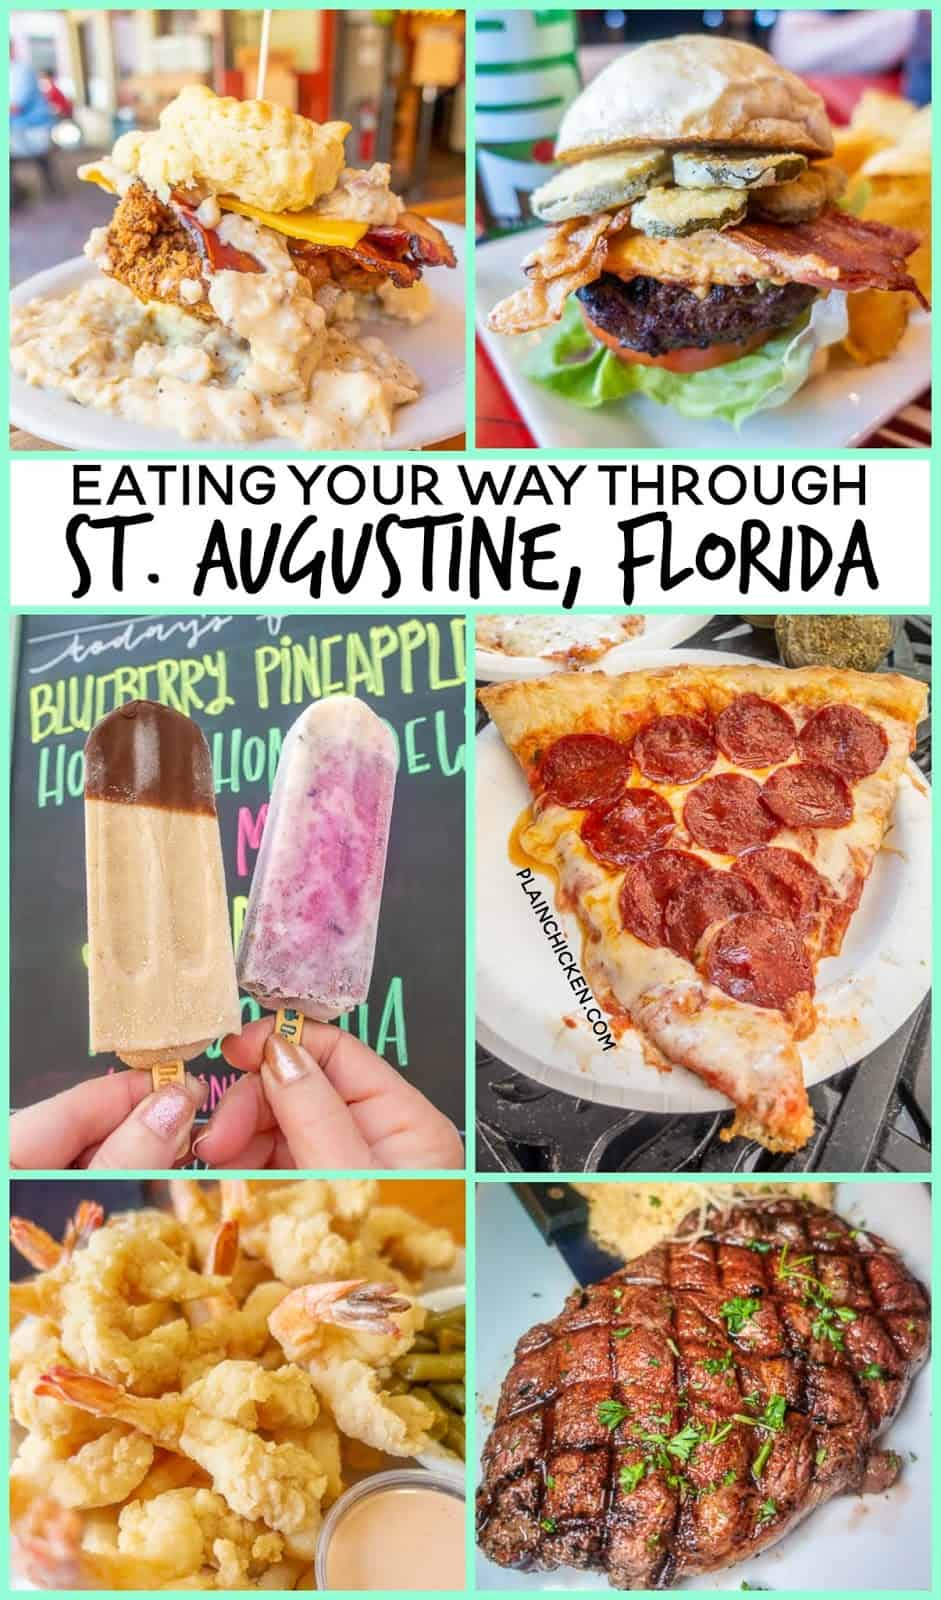 Where to Eat in St. Augustine, Florida - we found several hidden gems in St. Augustine that you MUST try on your next trip. Pizza, Burgers, Sandwiches, martinis, fried seafood and CRAZY milkshakes! Something for everyone!! #staugustine #florida #staugustinerestaurants